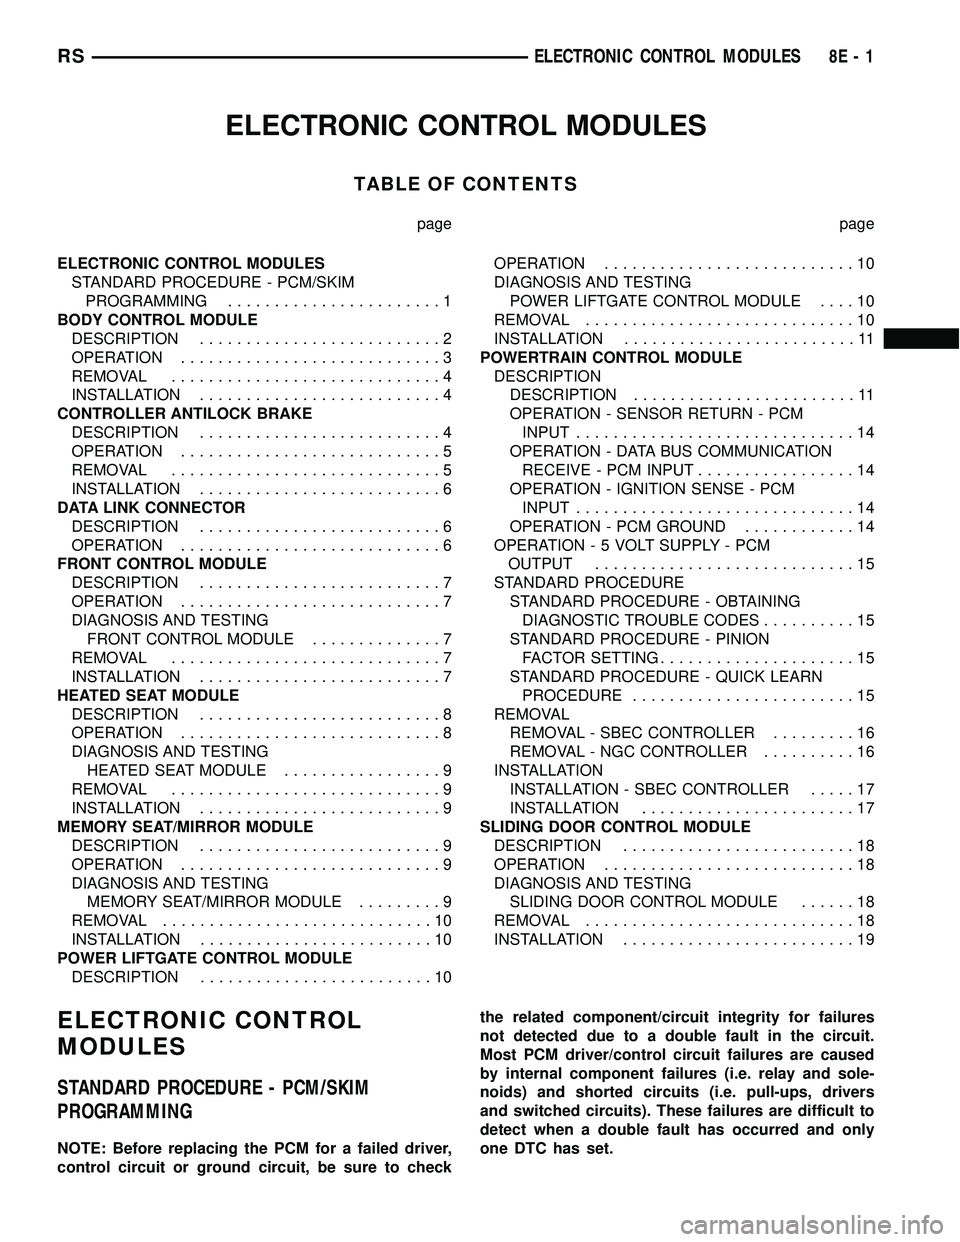 CHRYSLER VOYAGER 2005  Service Manual ELECTRONIC CONTROL MODULES
TABLE OF CONTENTS
page page
ELECTRONIC CONTROL MODULES
STANDARD PROCEDURE - PCM/SKIM
PROGRAMMING.......................1
BODY CONTROL MODULE
DESCRIPTION.....................